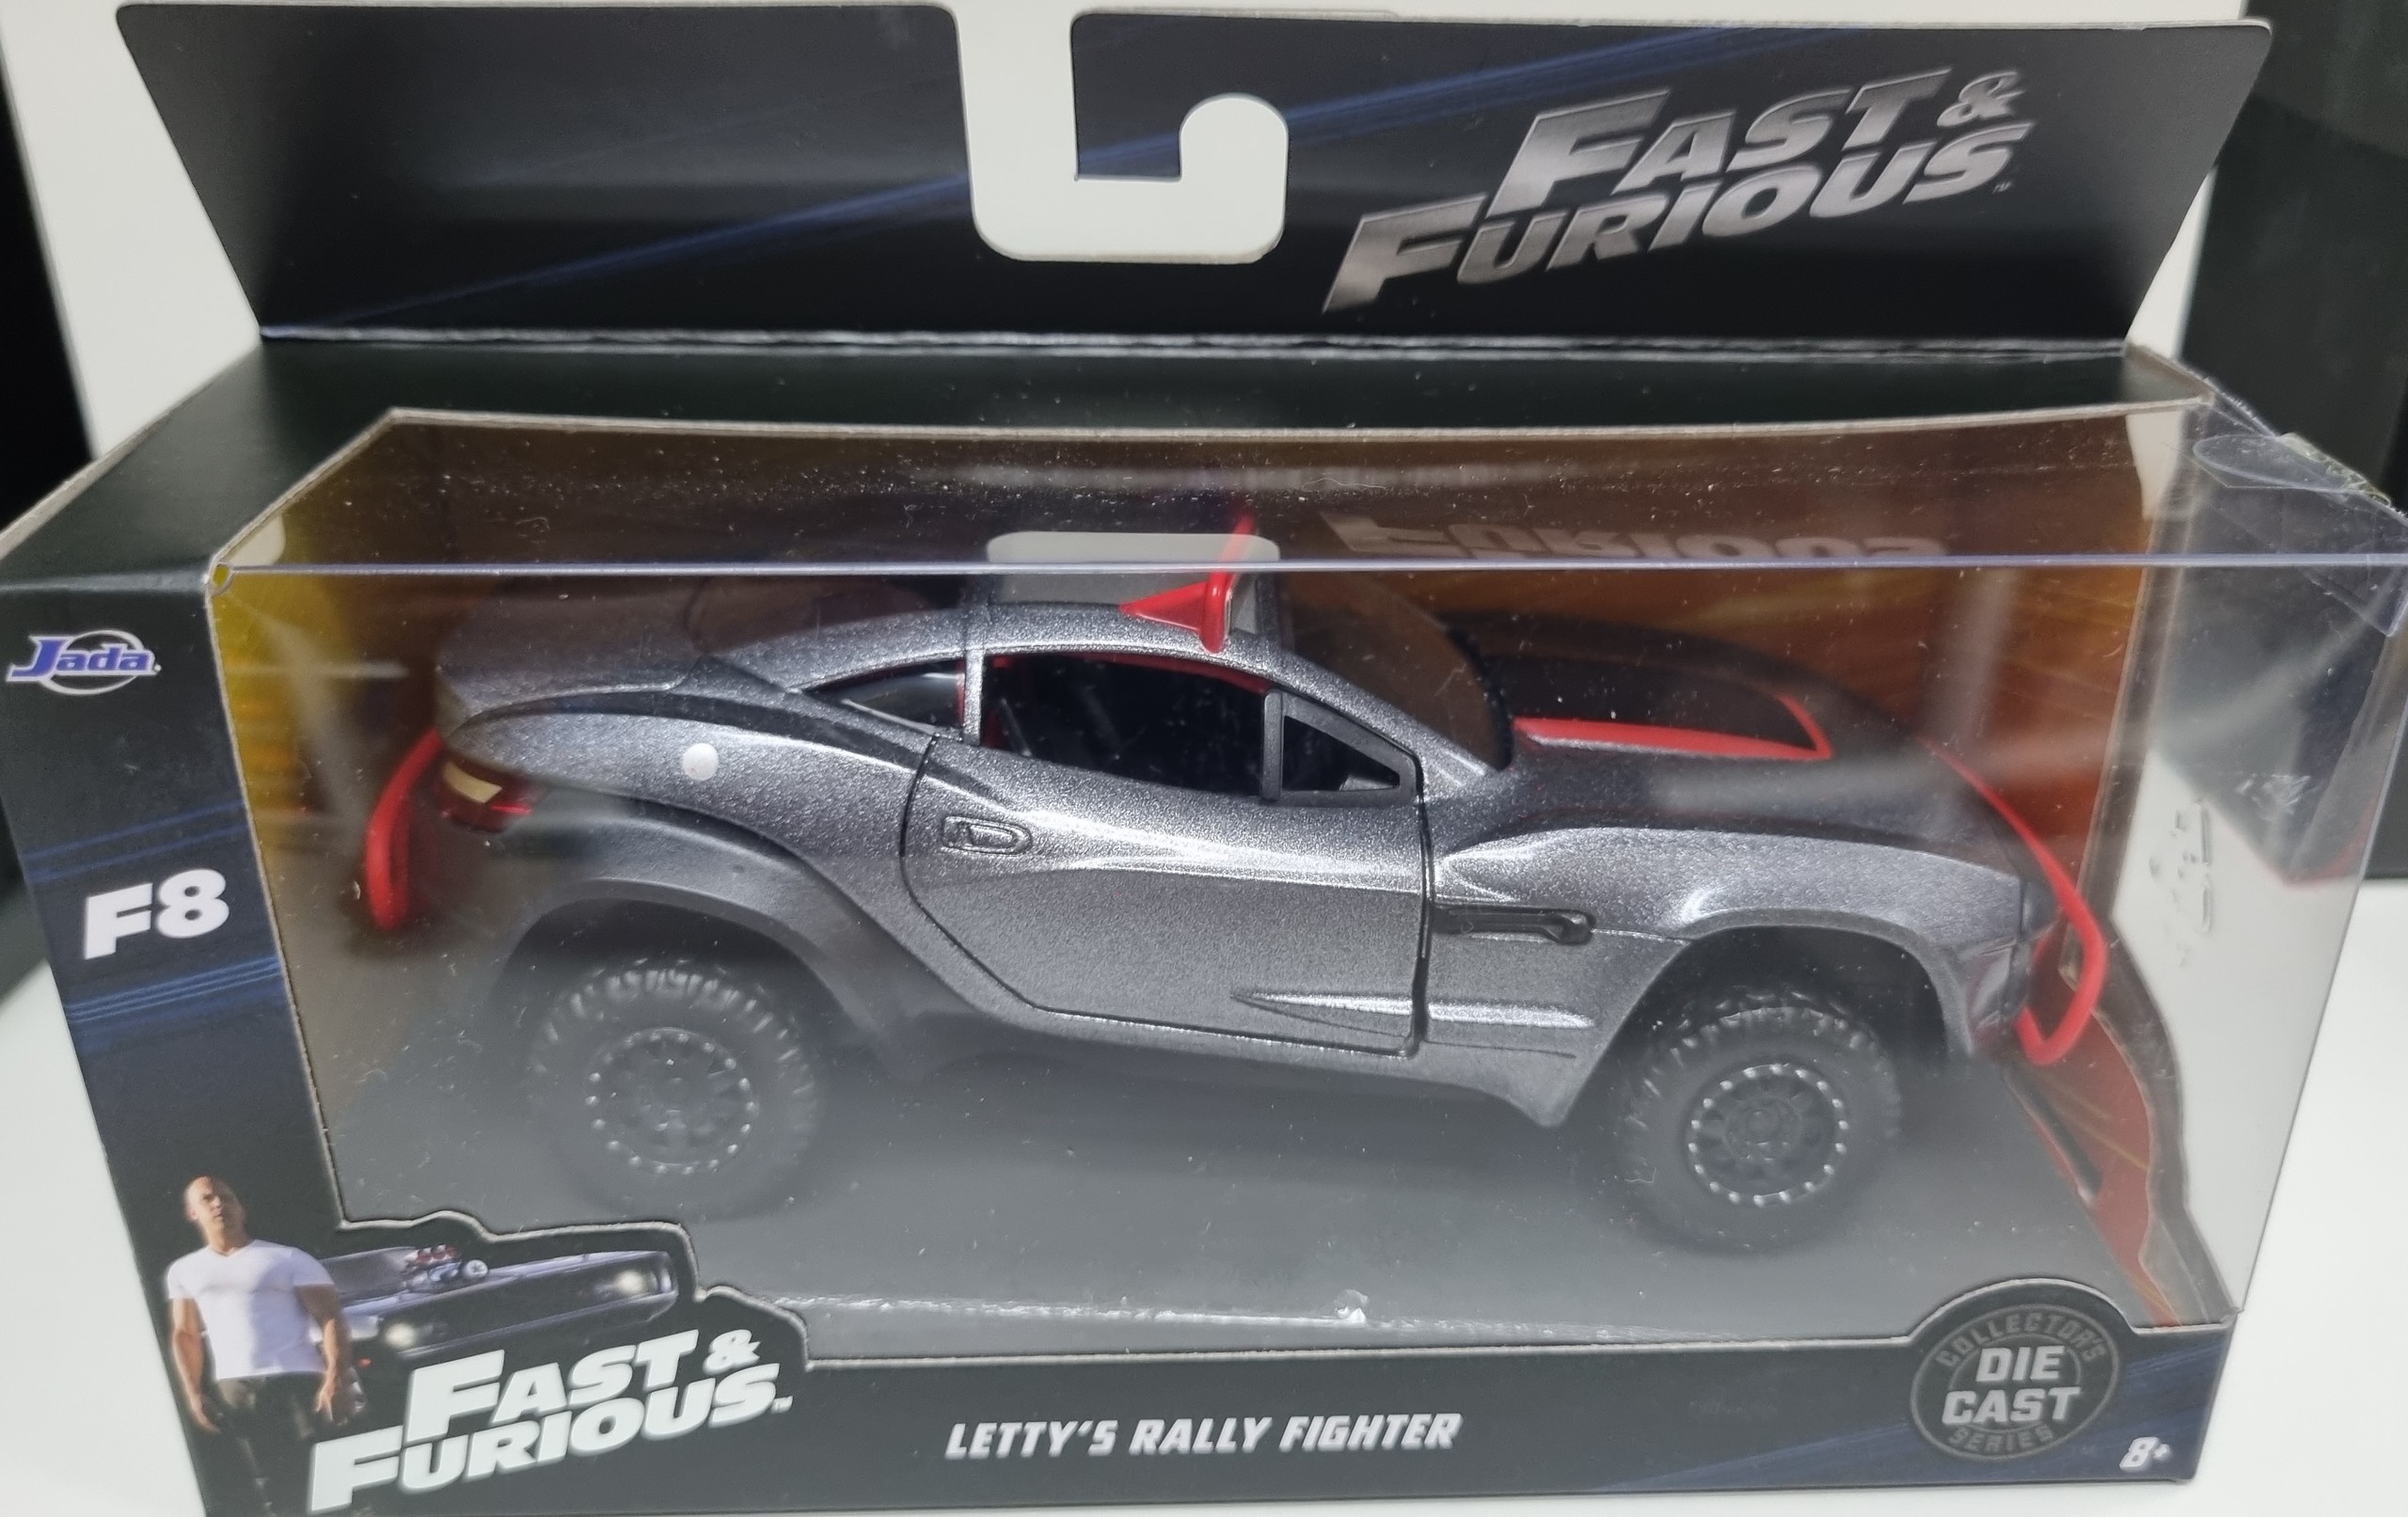 Fast & Furious Letty's Rally Fighter 1/32 Jada